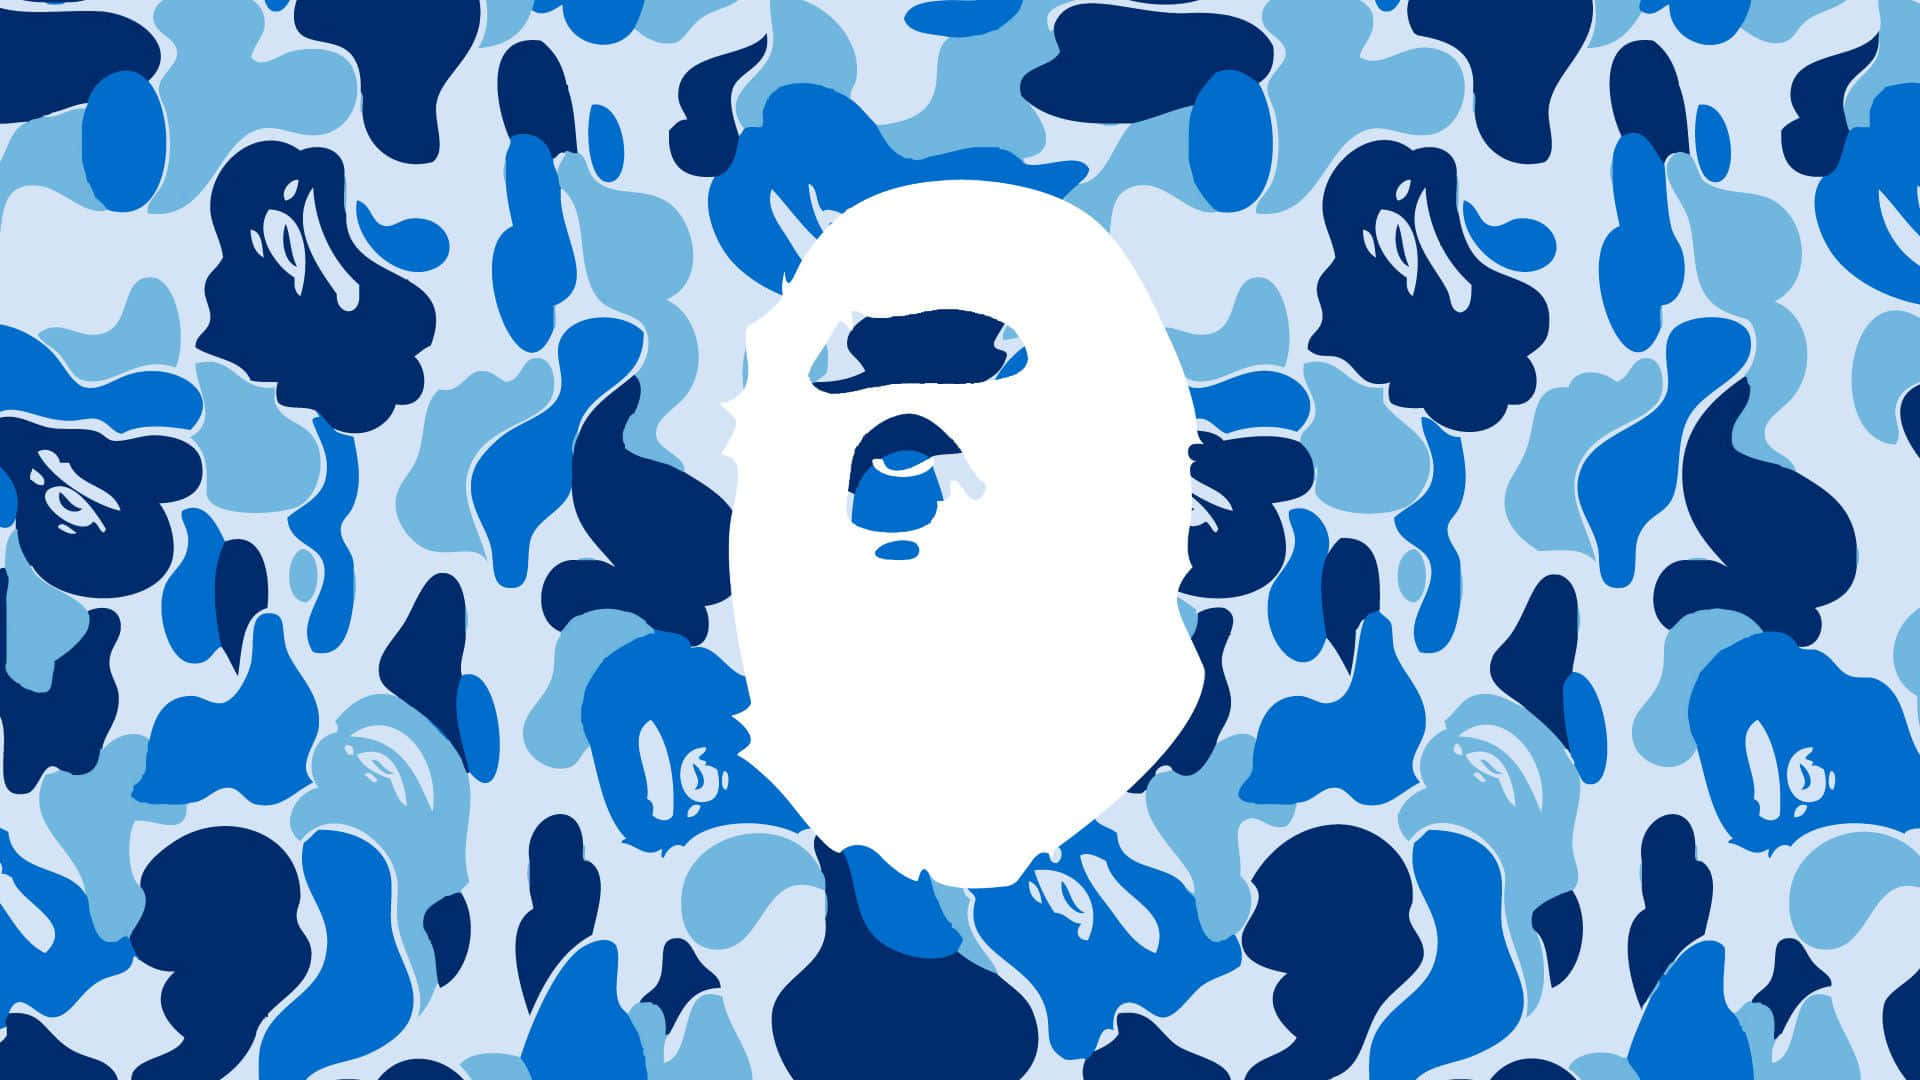 Stand out in style with this trendy blue camo Wallpaper